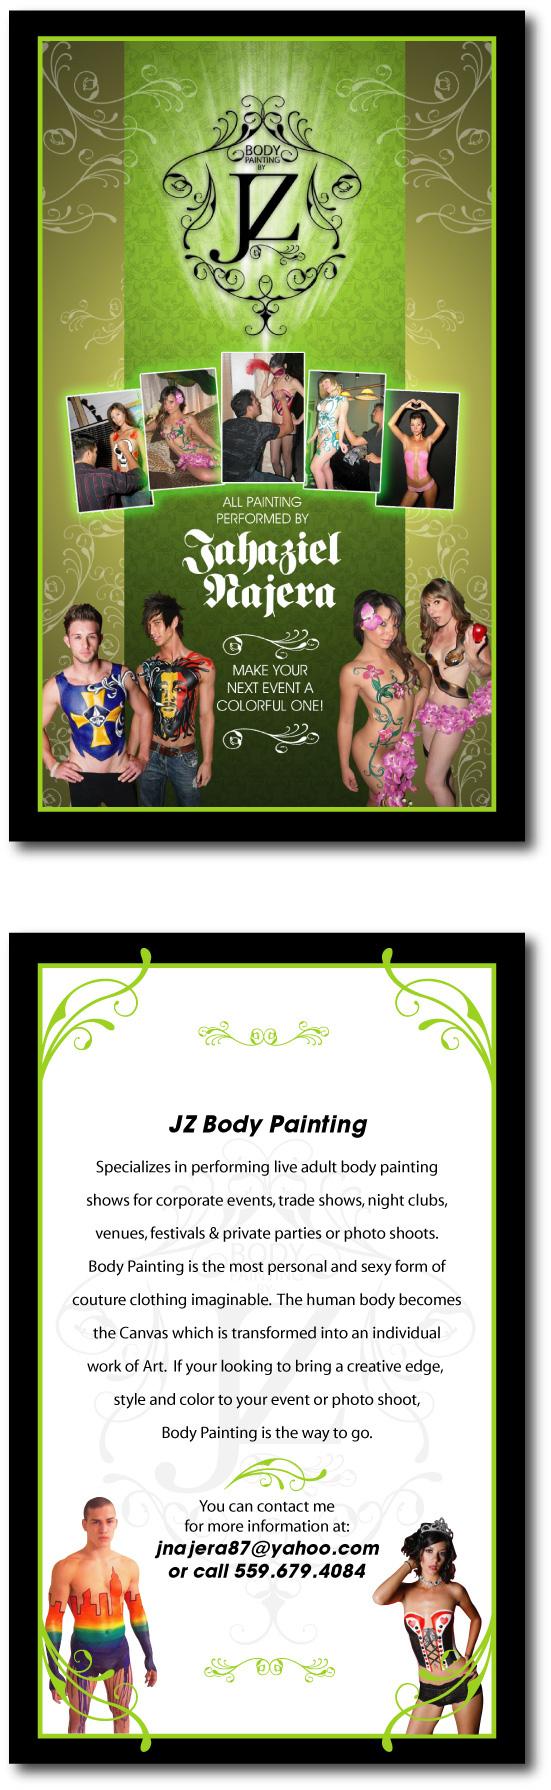 Male and Female model photo shoot of Body Paint by JZ, Chelsea87 and Corey Koeppel in Phoenix Az